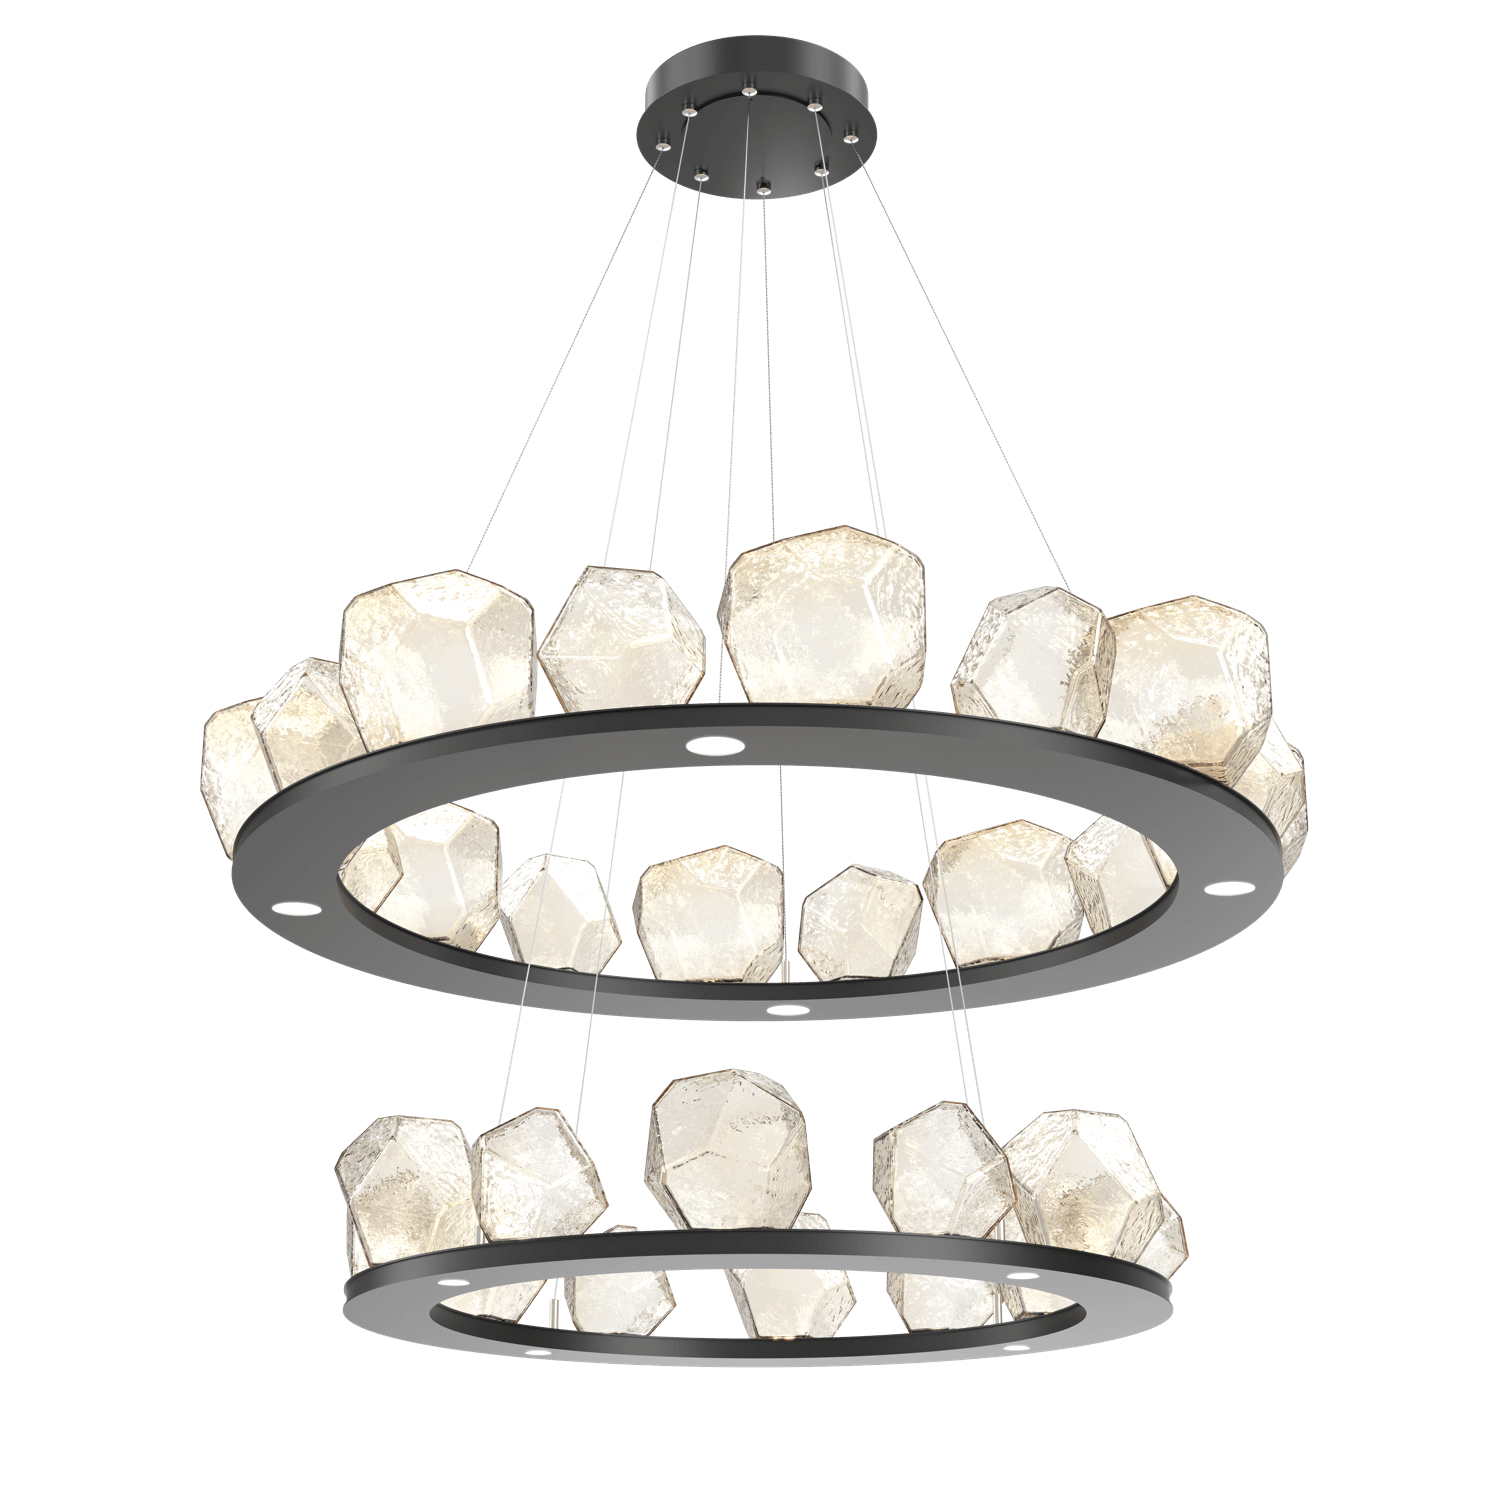 CHB0039-2B-MB-A-Hammerton-Studio-Gem-48-inch-two-tier-ring-chandelier-with-matte-black-finish-and-amber-blown-glass-shades-and-LED-lamping